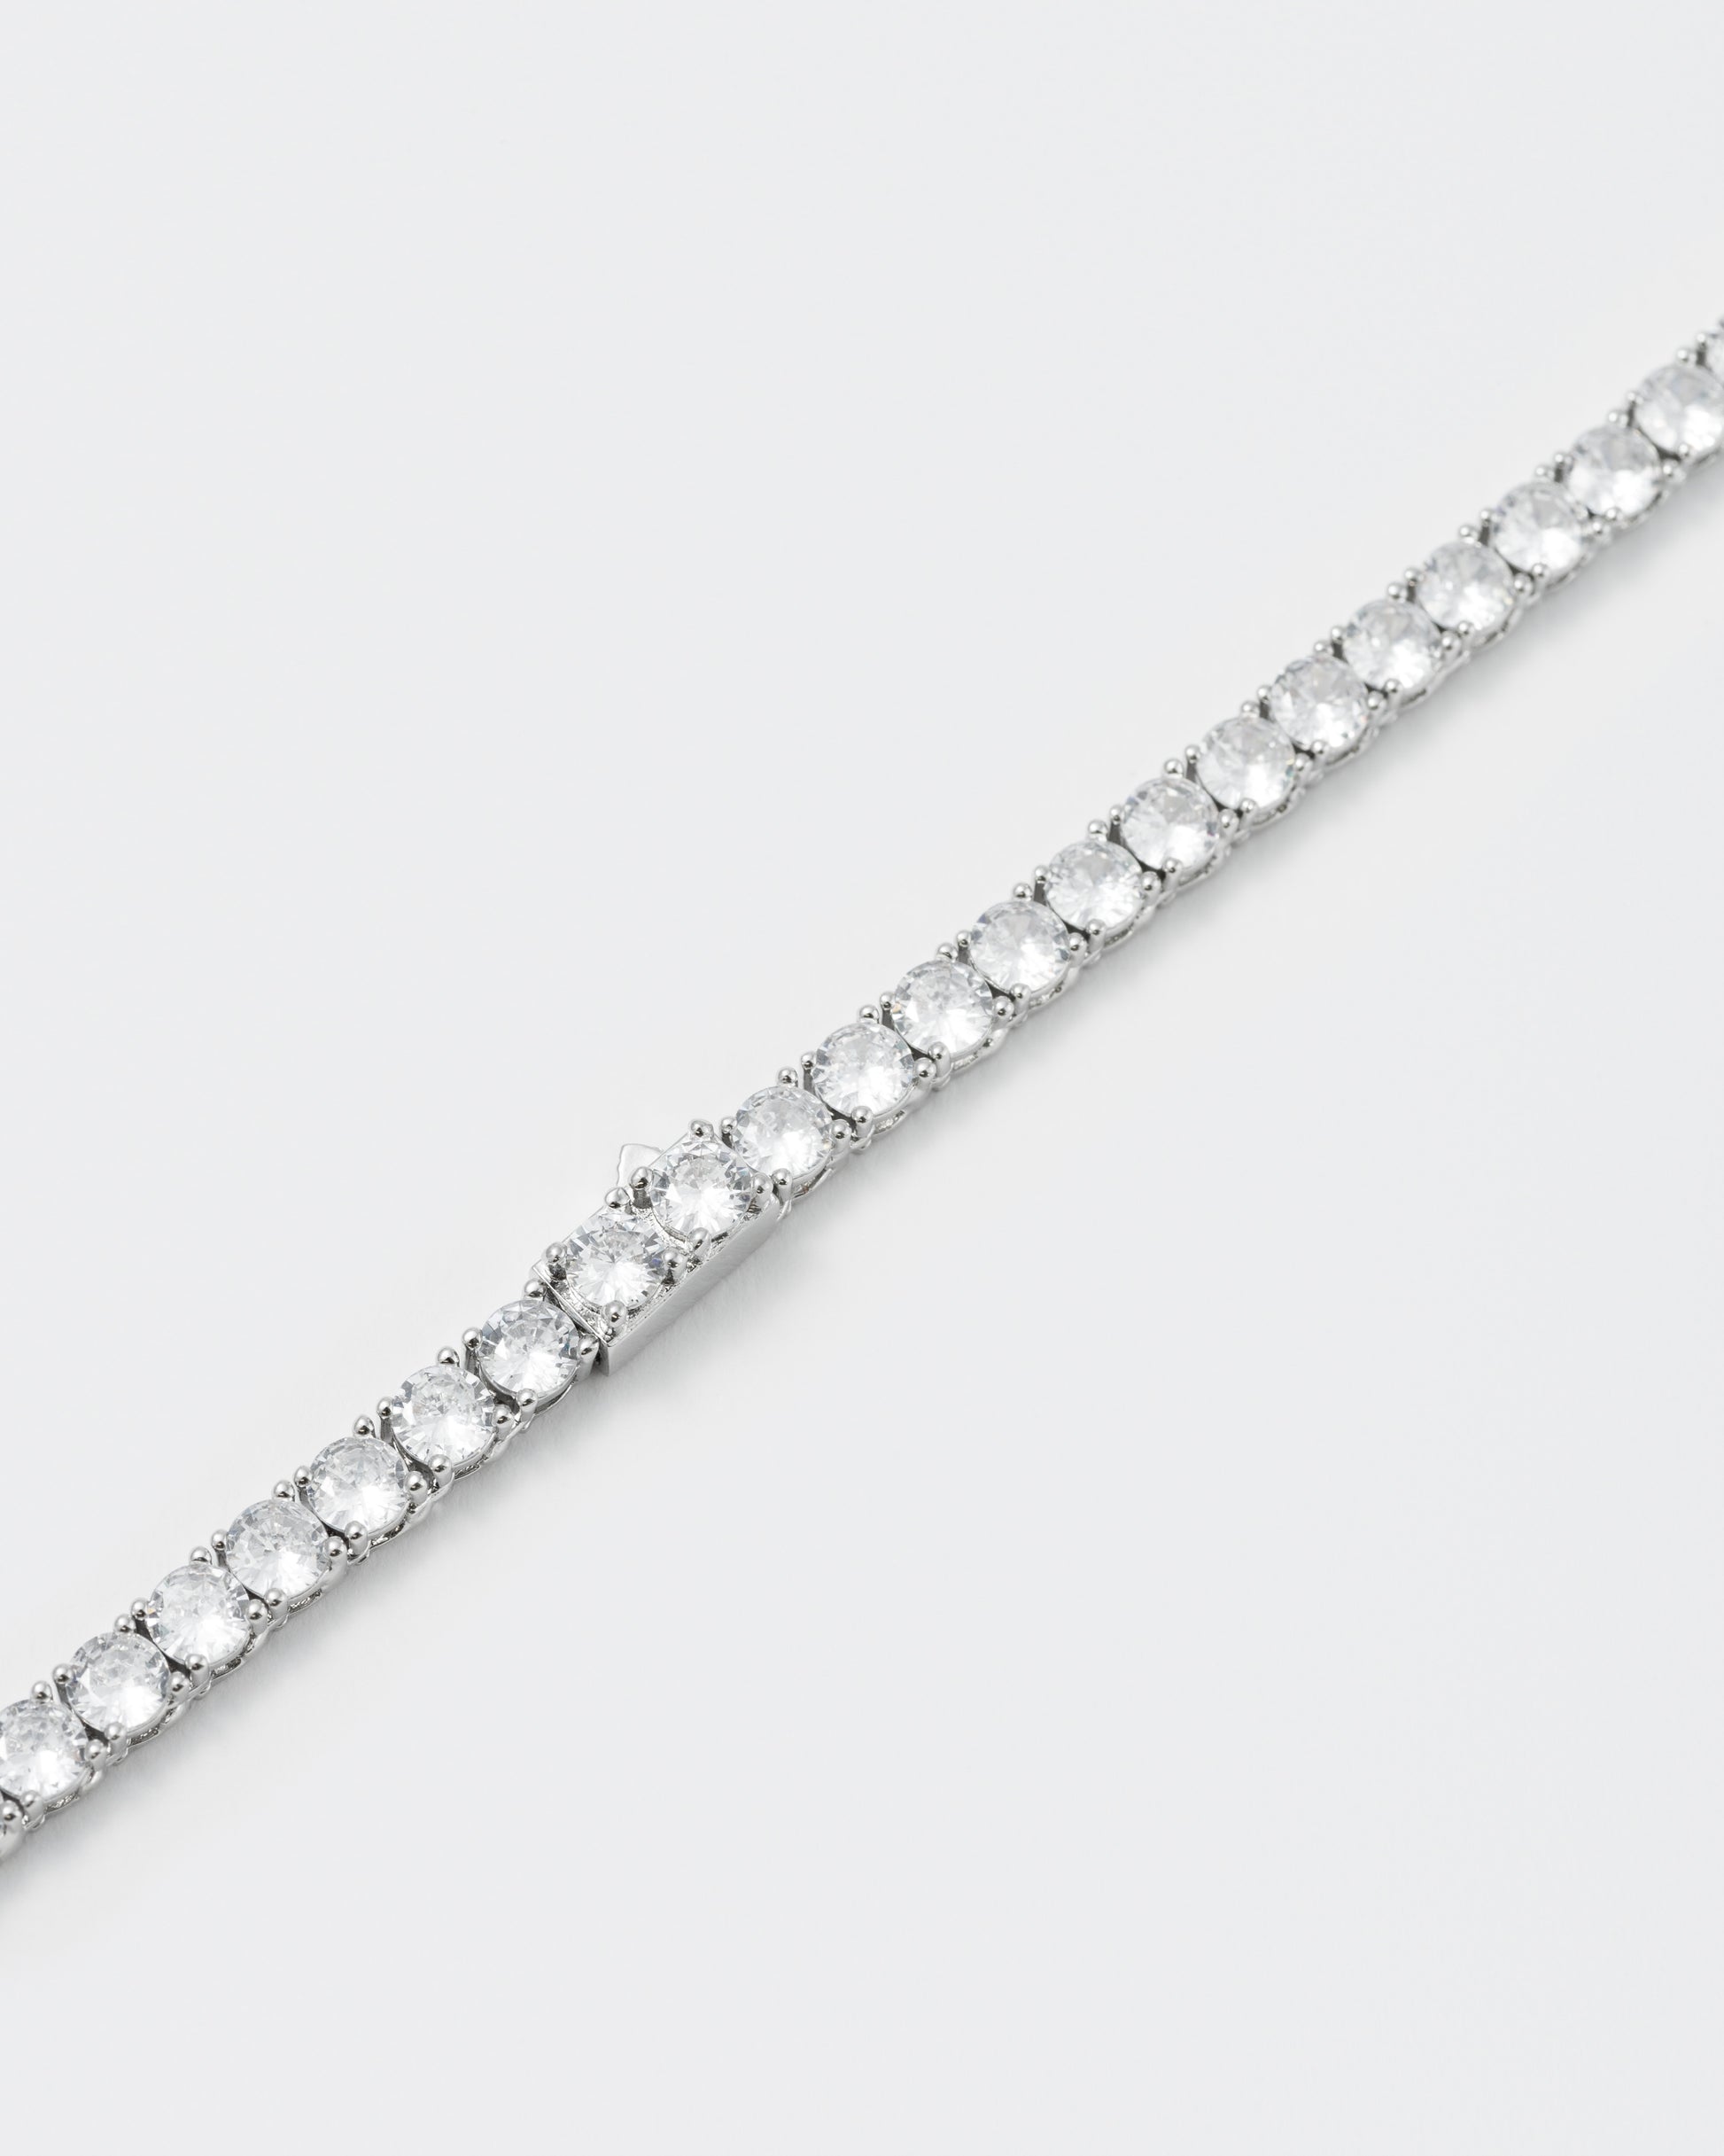 detail of tennis bracelet with 18kt white gold coating and hand-set round brilliant-cut stones in diamond white